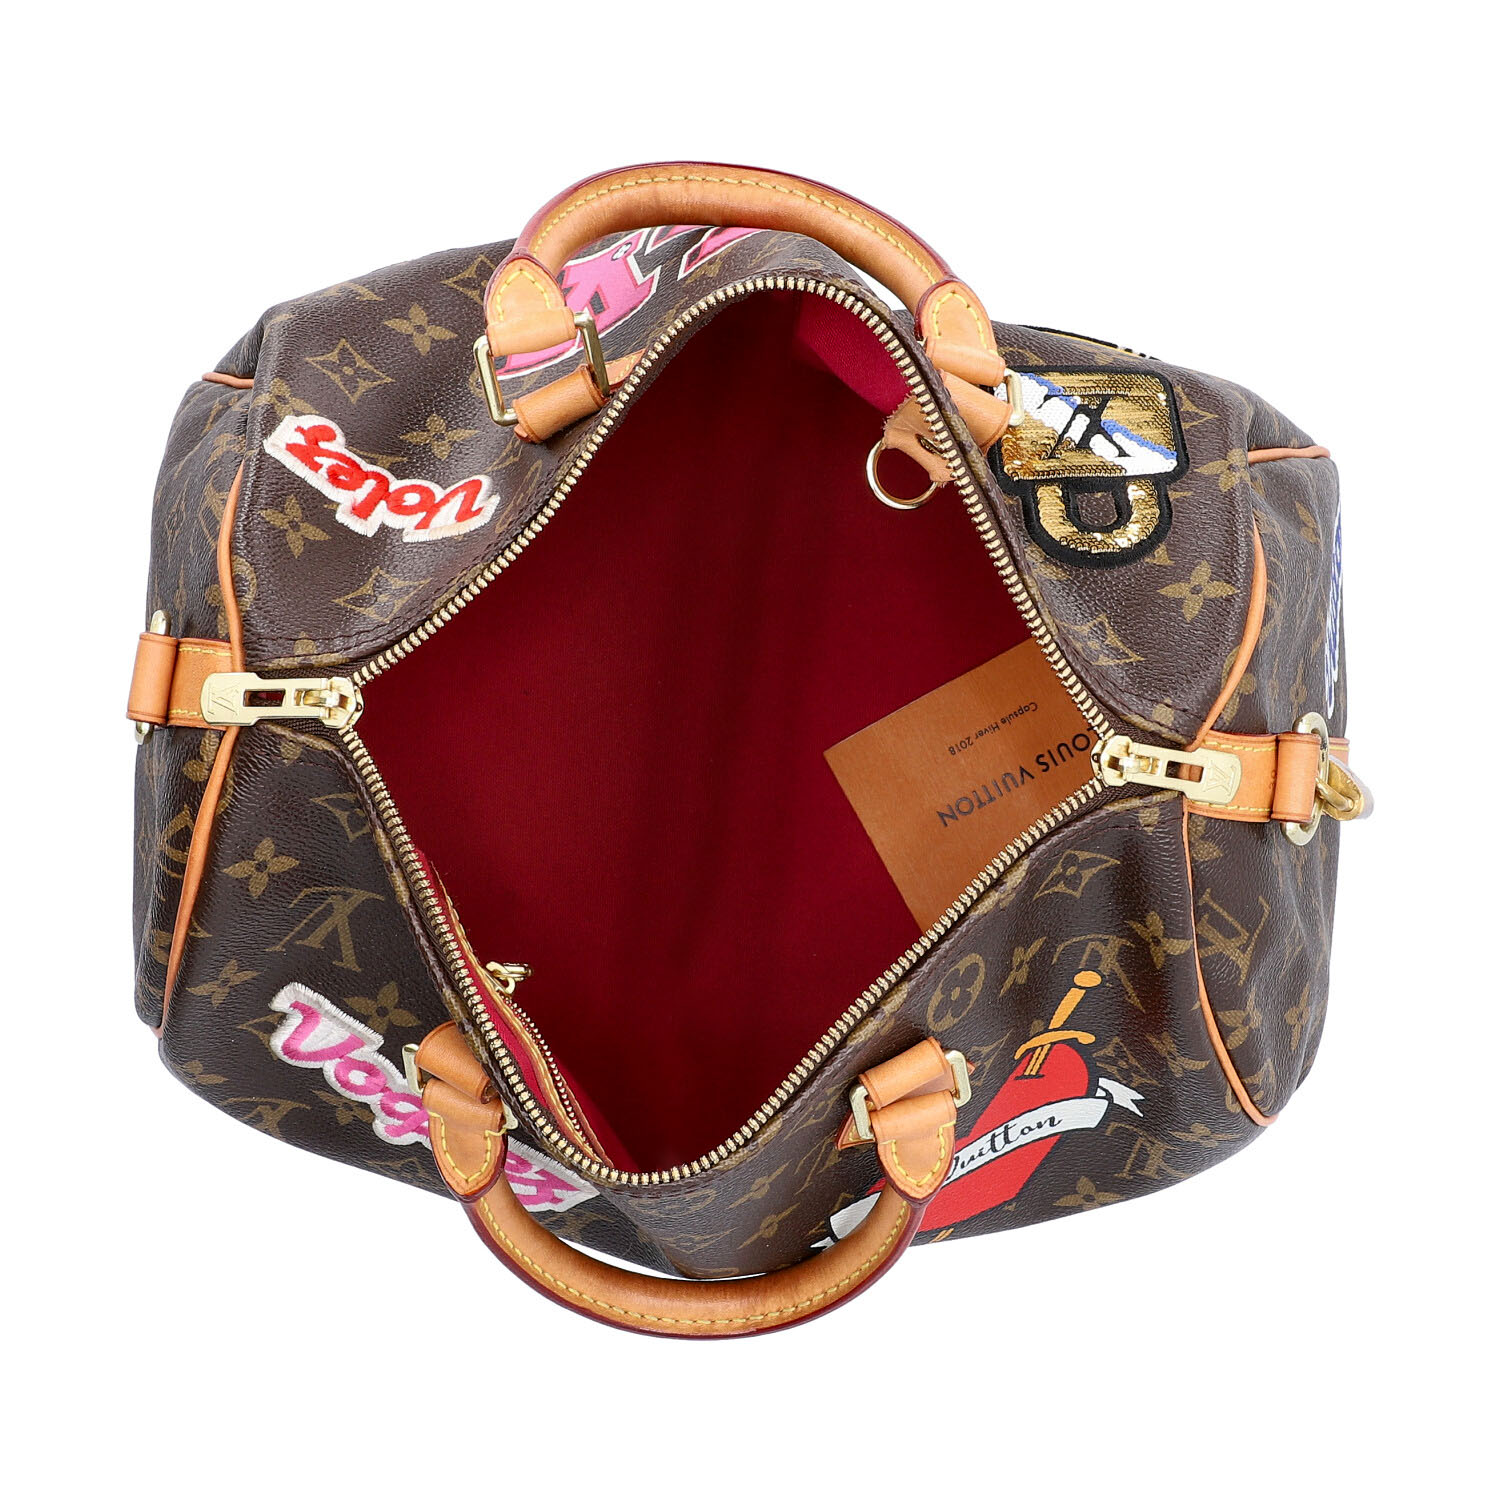 LOUIS VUITTON Handtasche "SPEEDY 30", Capsule Kollektion Hiver 2018.Limited Edition. M - Image 6 of 9